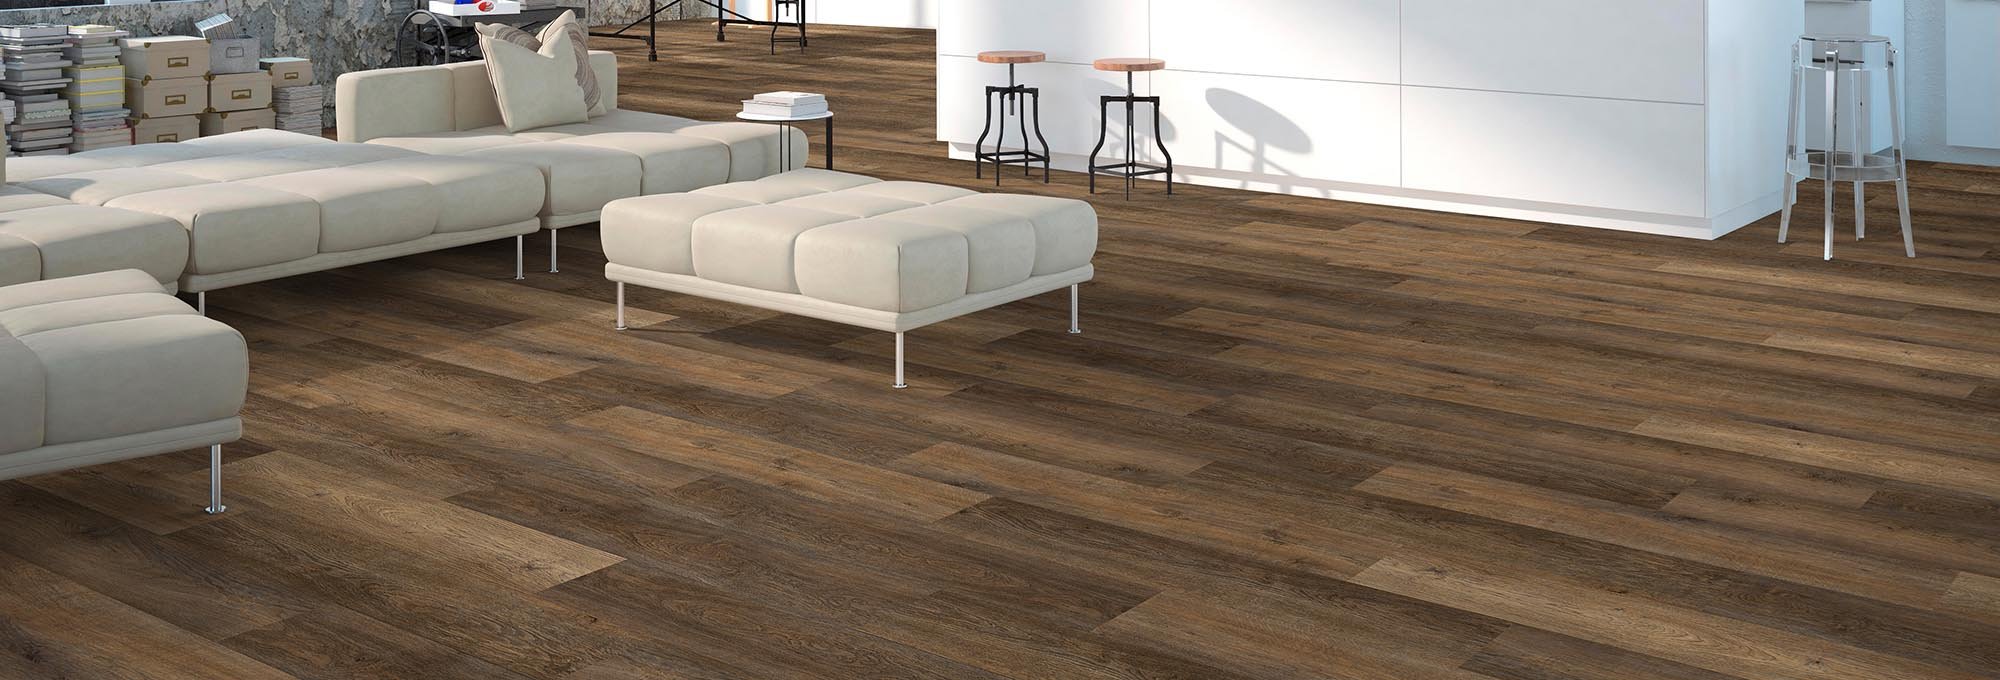 Shop Flooring Products from Decorating Ideas in Powell, WY